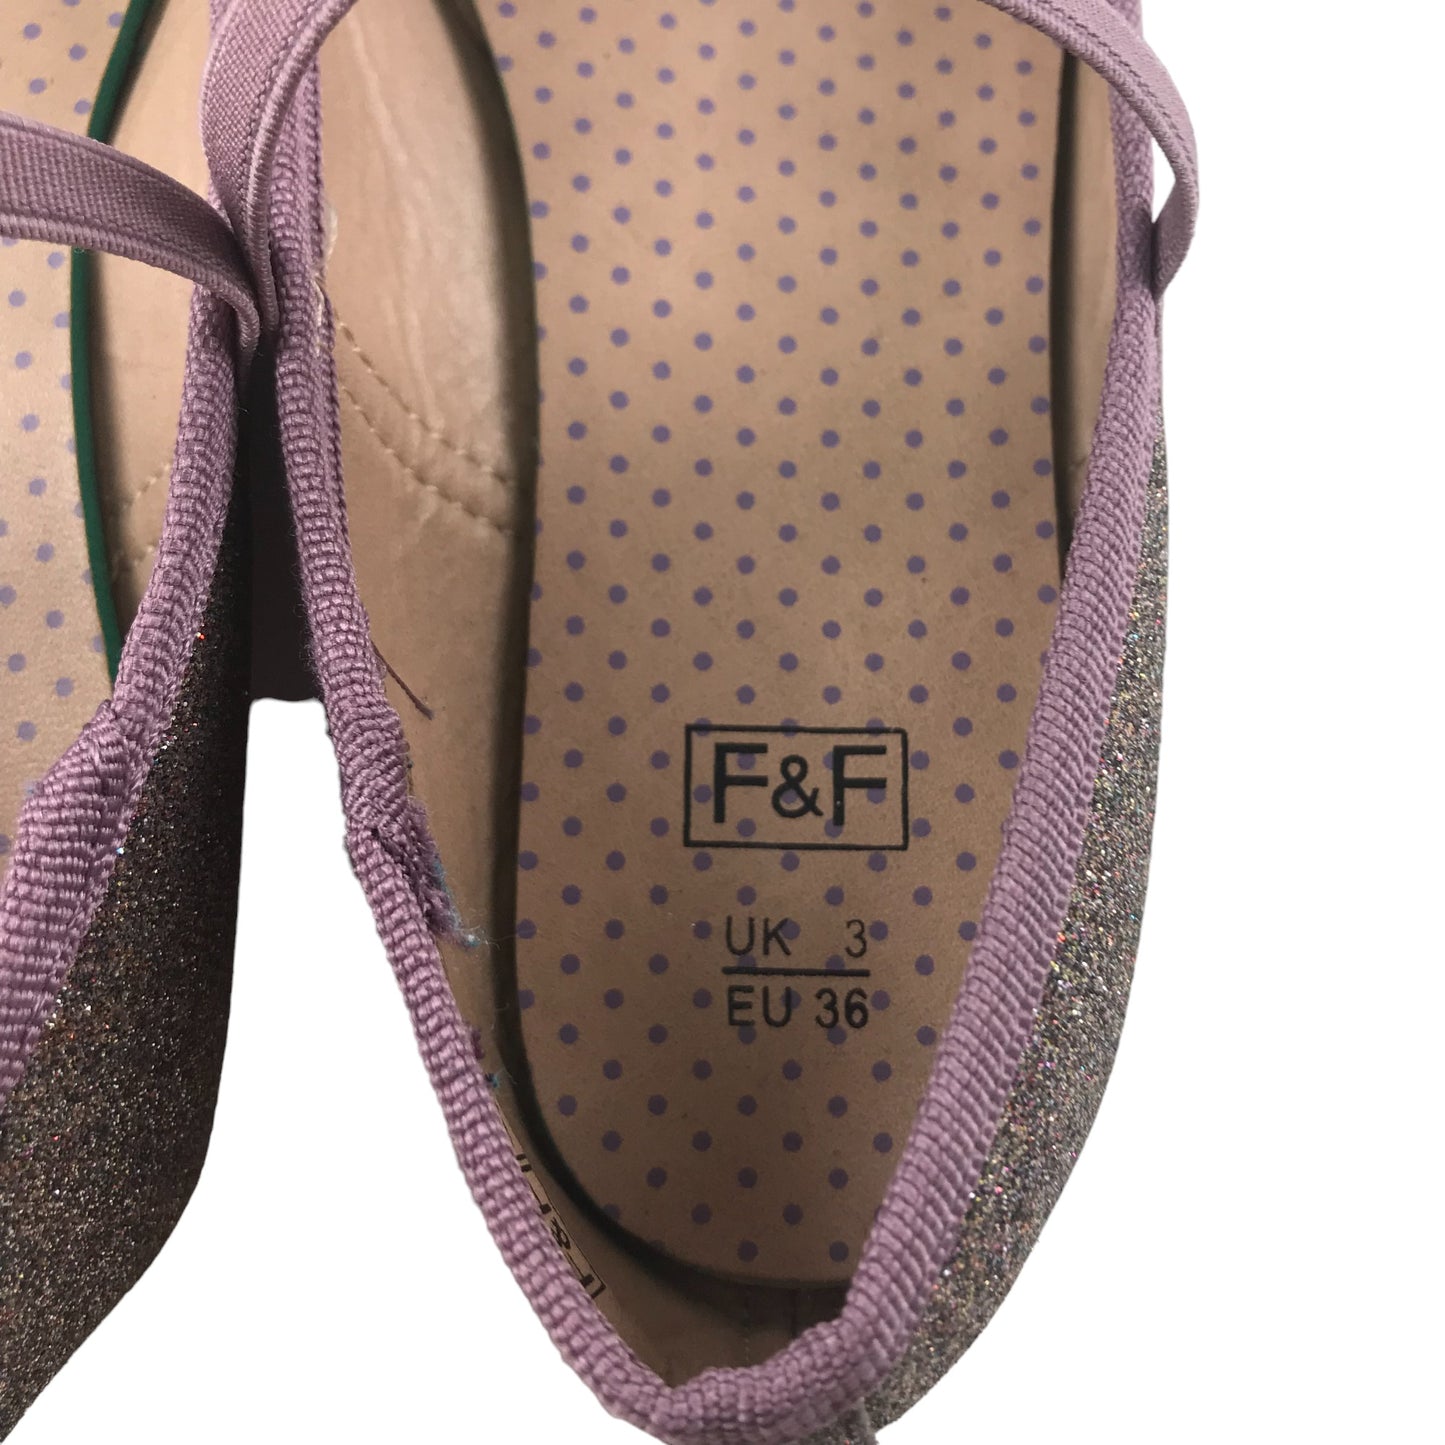 F&F Ballerinas Shoe Size 3 Pink Glittery with Elasticated Bar